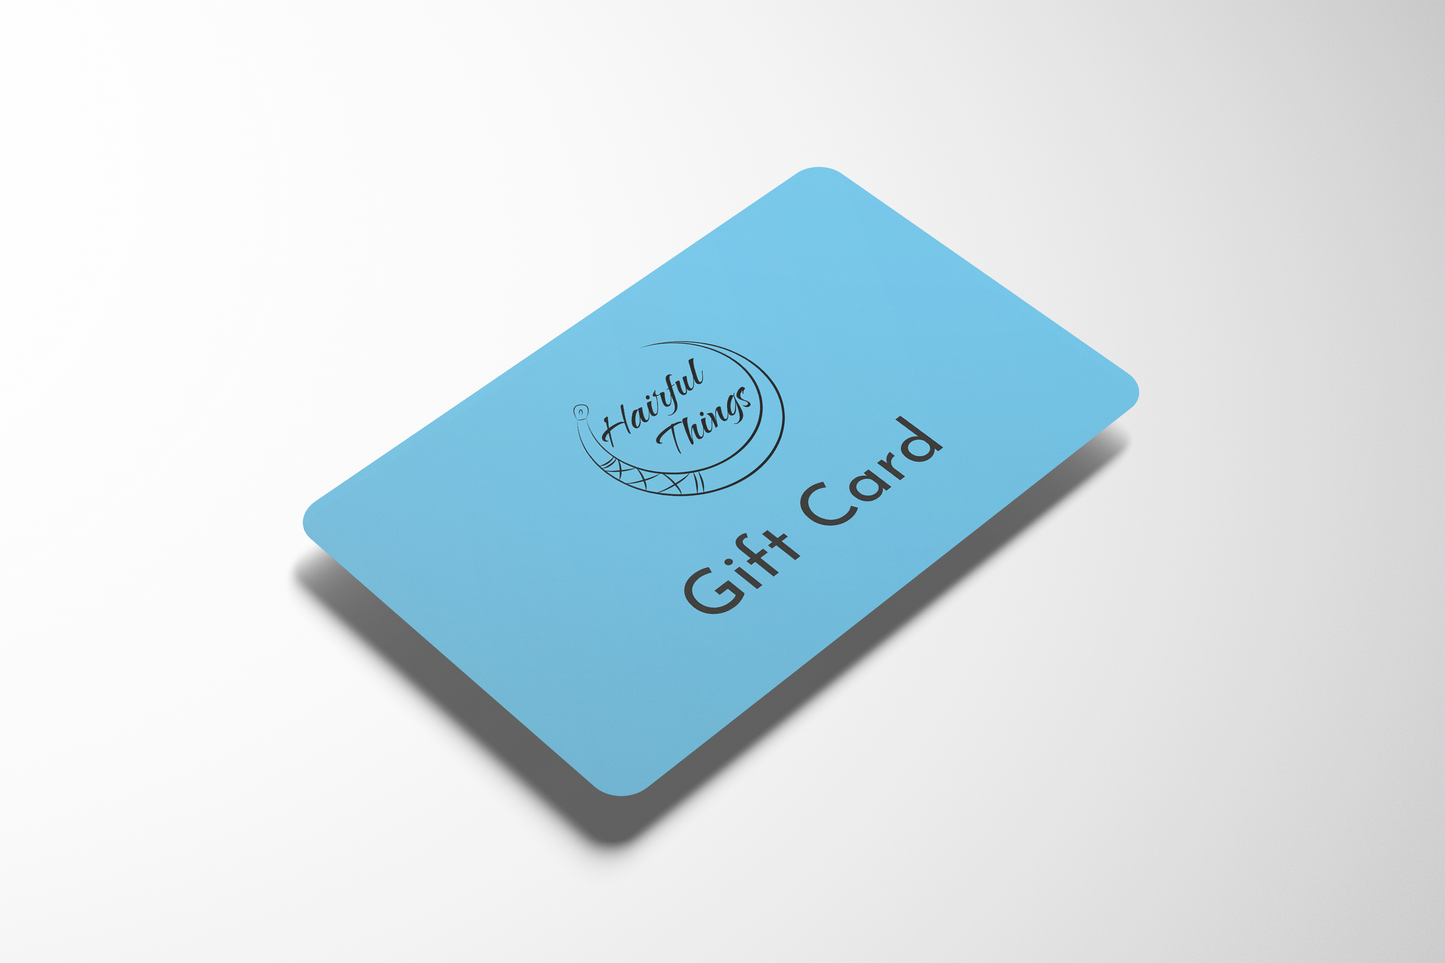 $250 USD Gift Card